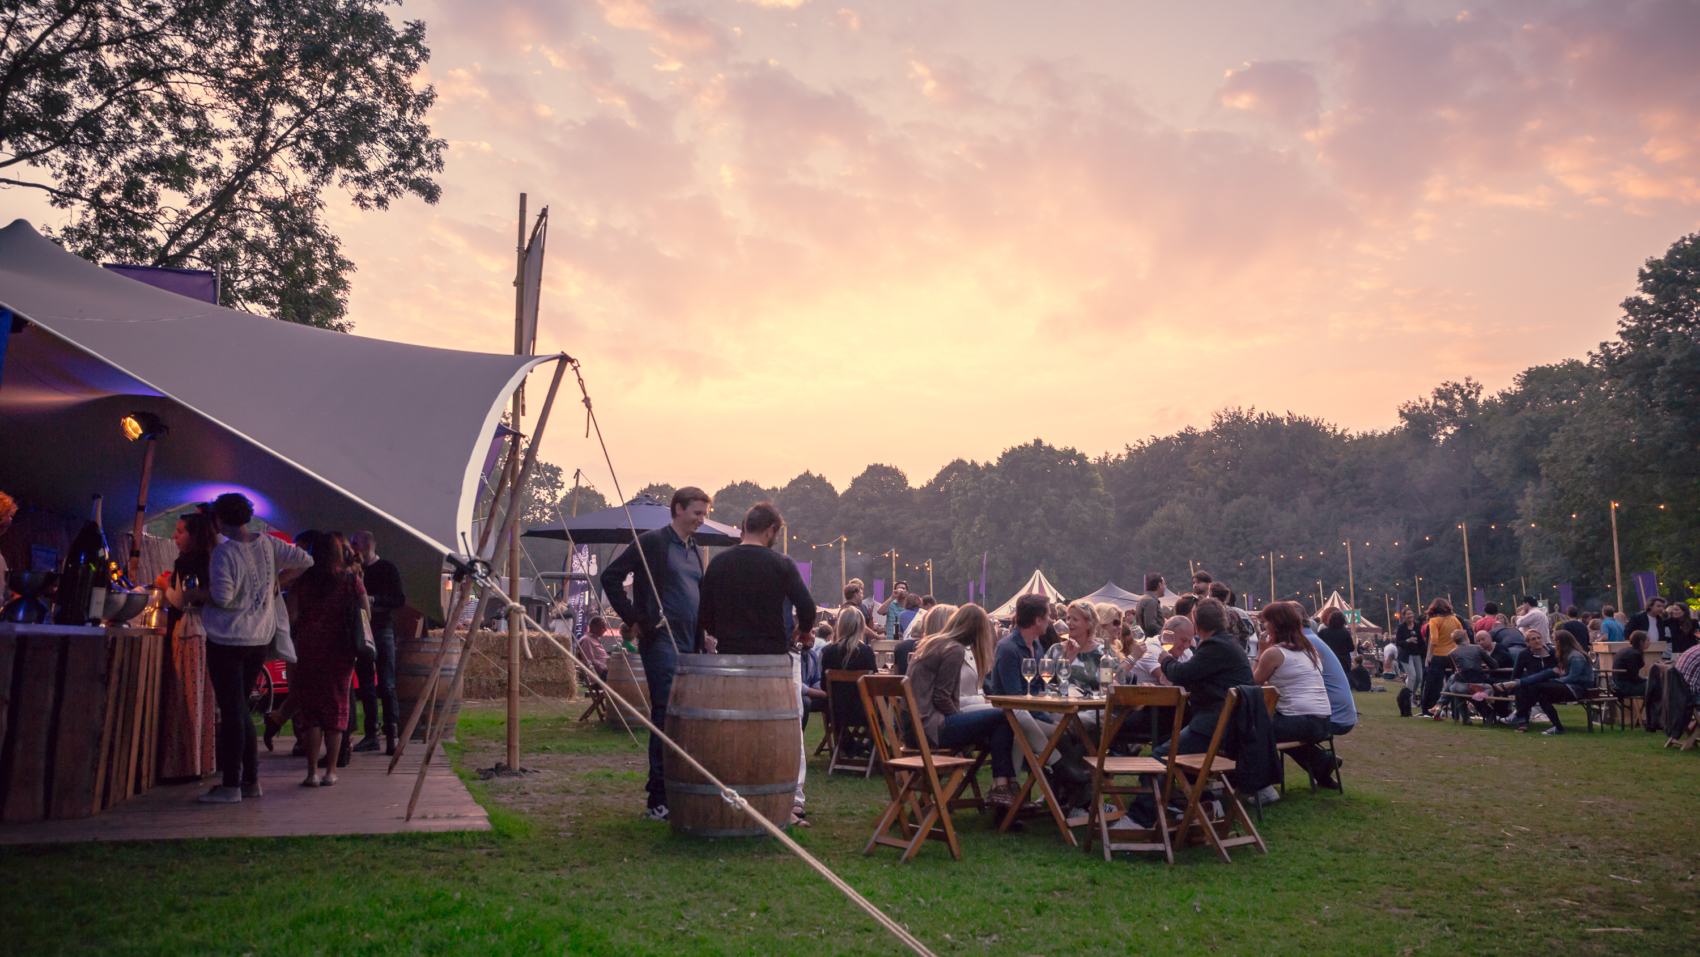 The Bacchus Wine Festival in the Amsterdam Forest